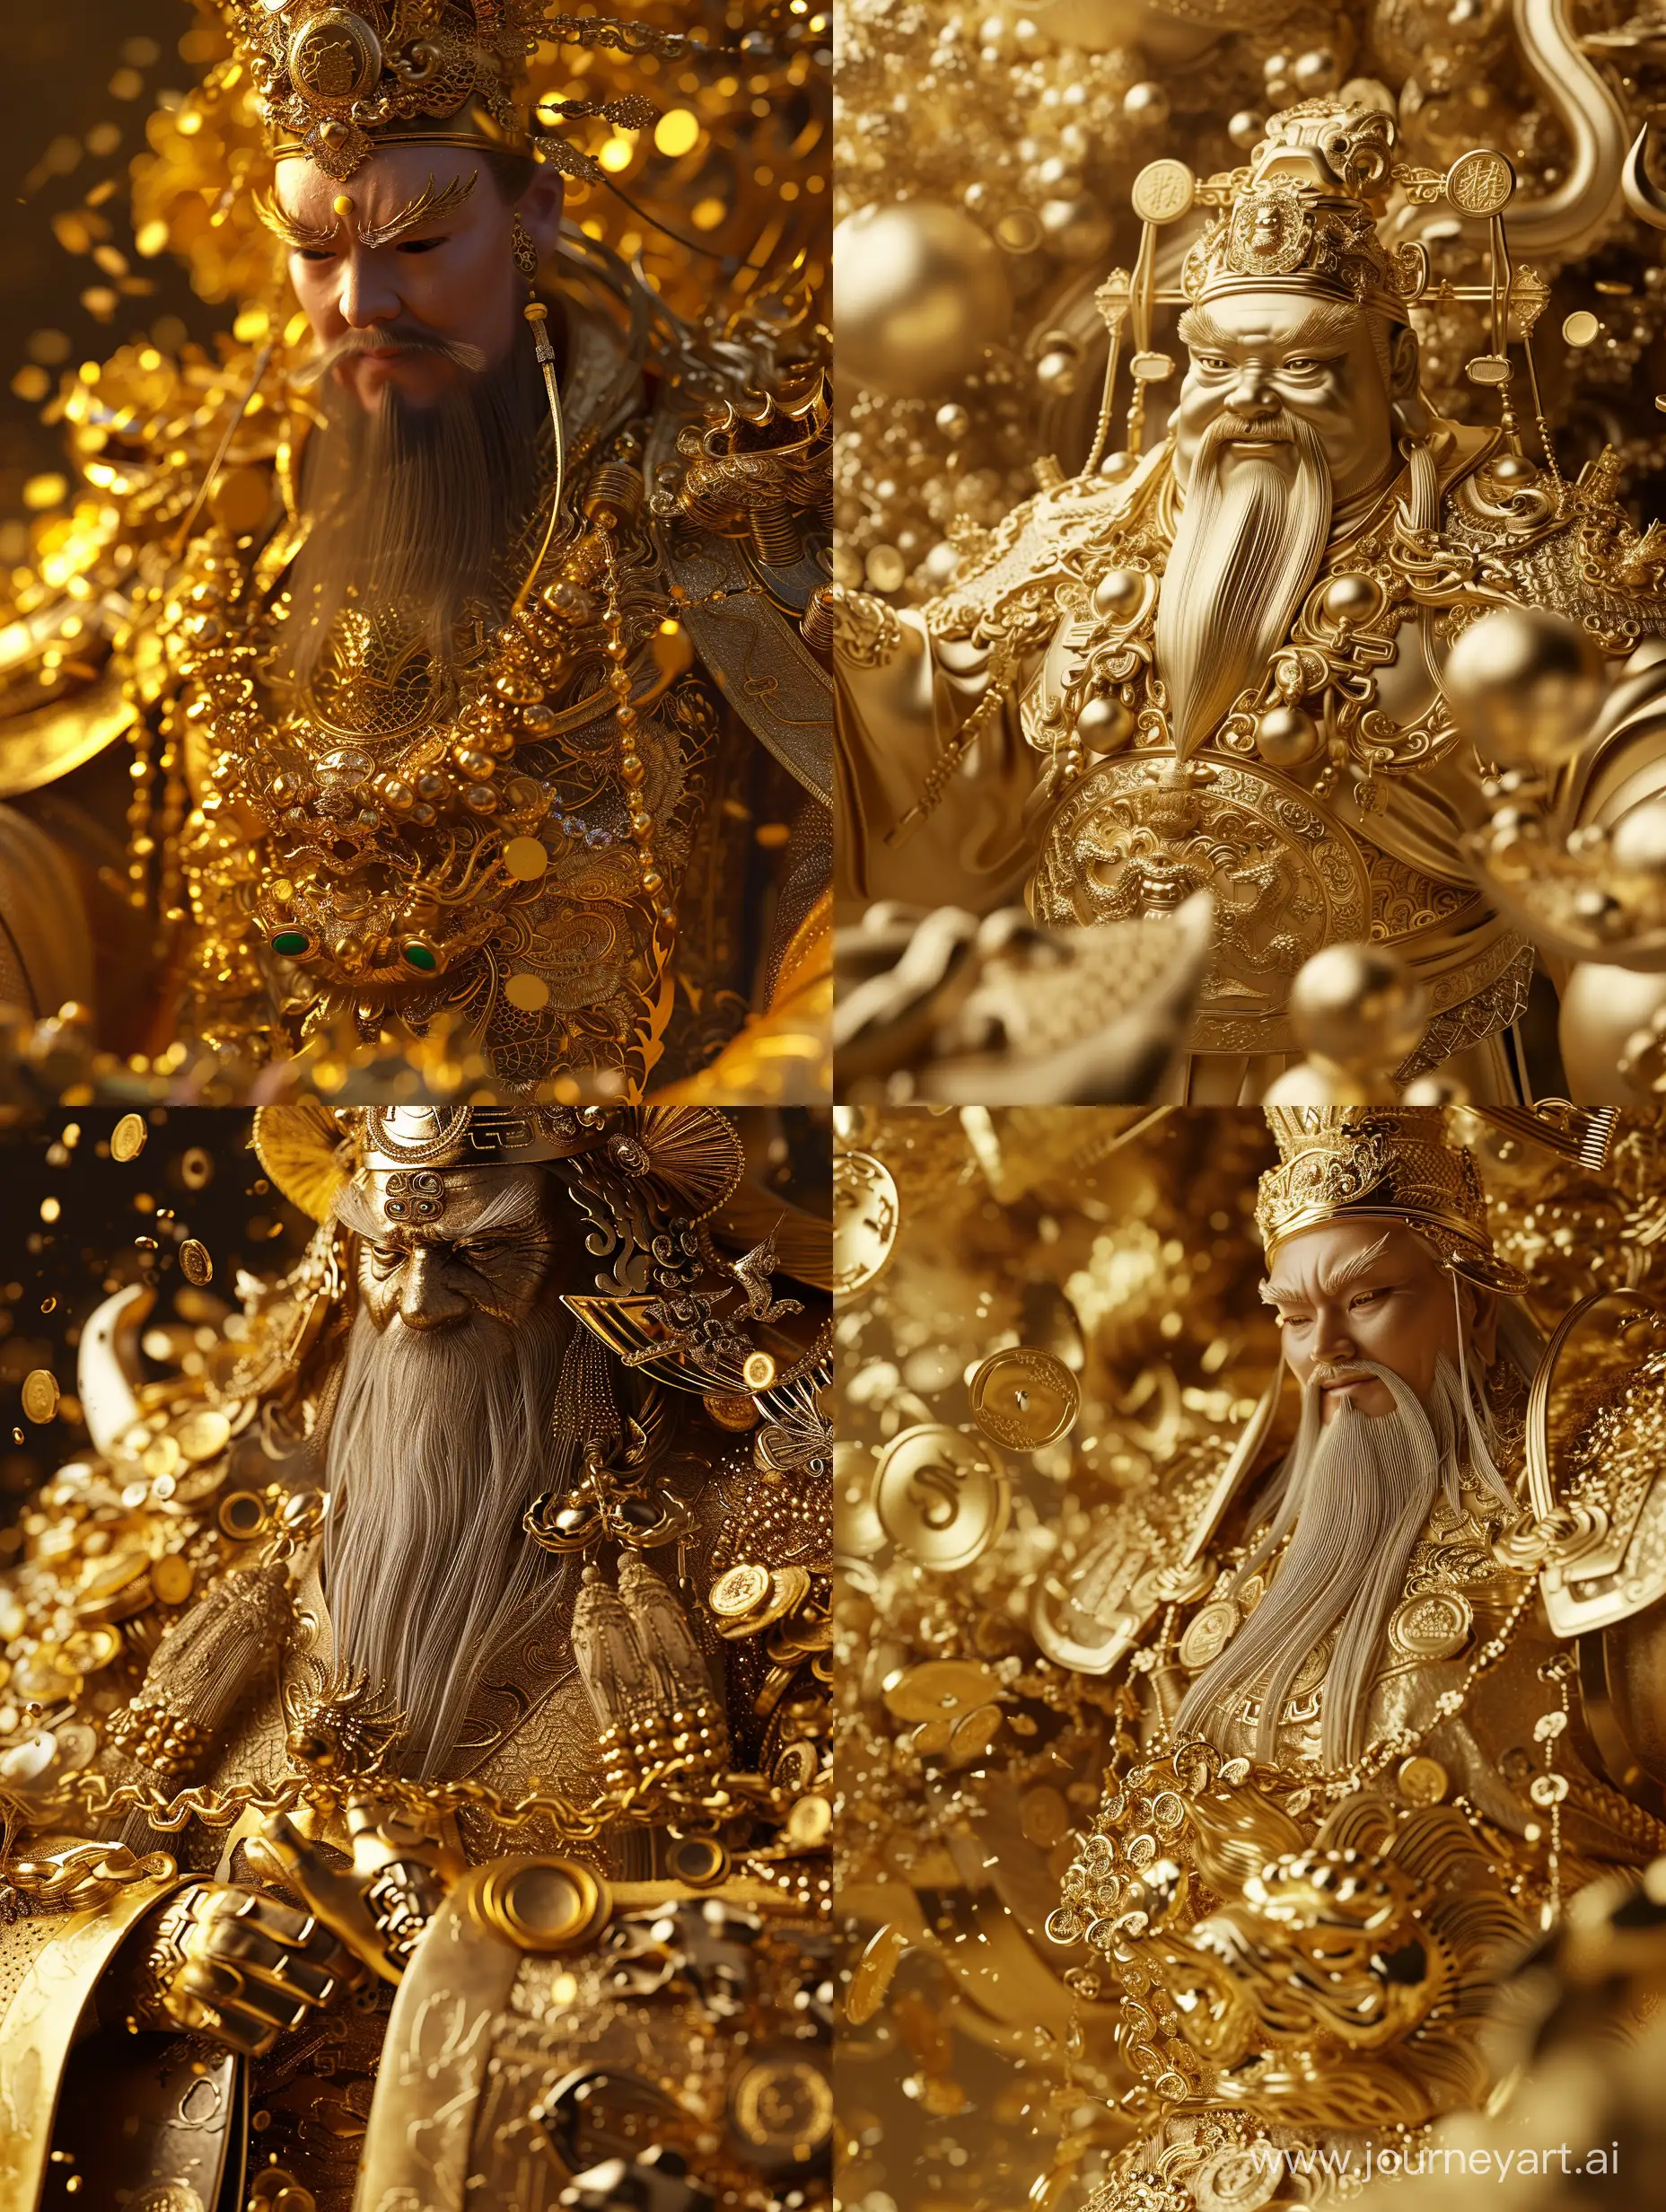 (Chinese God of Wealth 3D Image, (Golden Clothing and Accessories), (Gold Ingot Embraced), (Cascading Gold Coins), (Detailed Textures and Reflections), Nelson Wu, (Gold Tones and Warm Hues), (Exquisite Detailing and Masterful Lighting), Close-Up Shot)